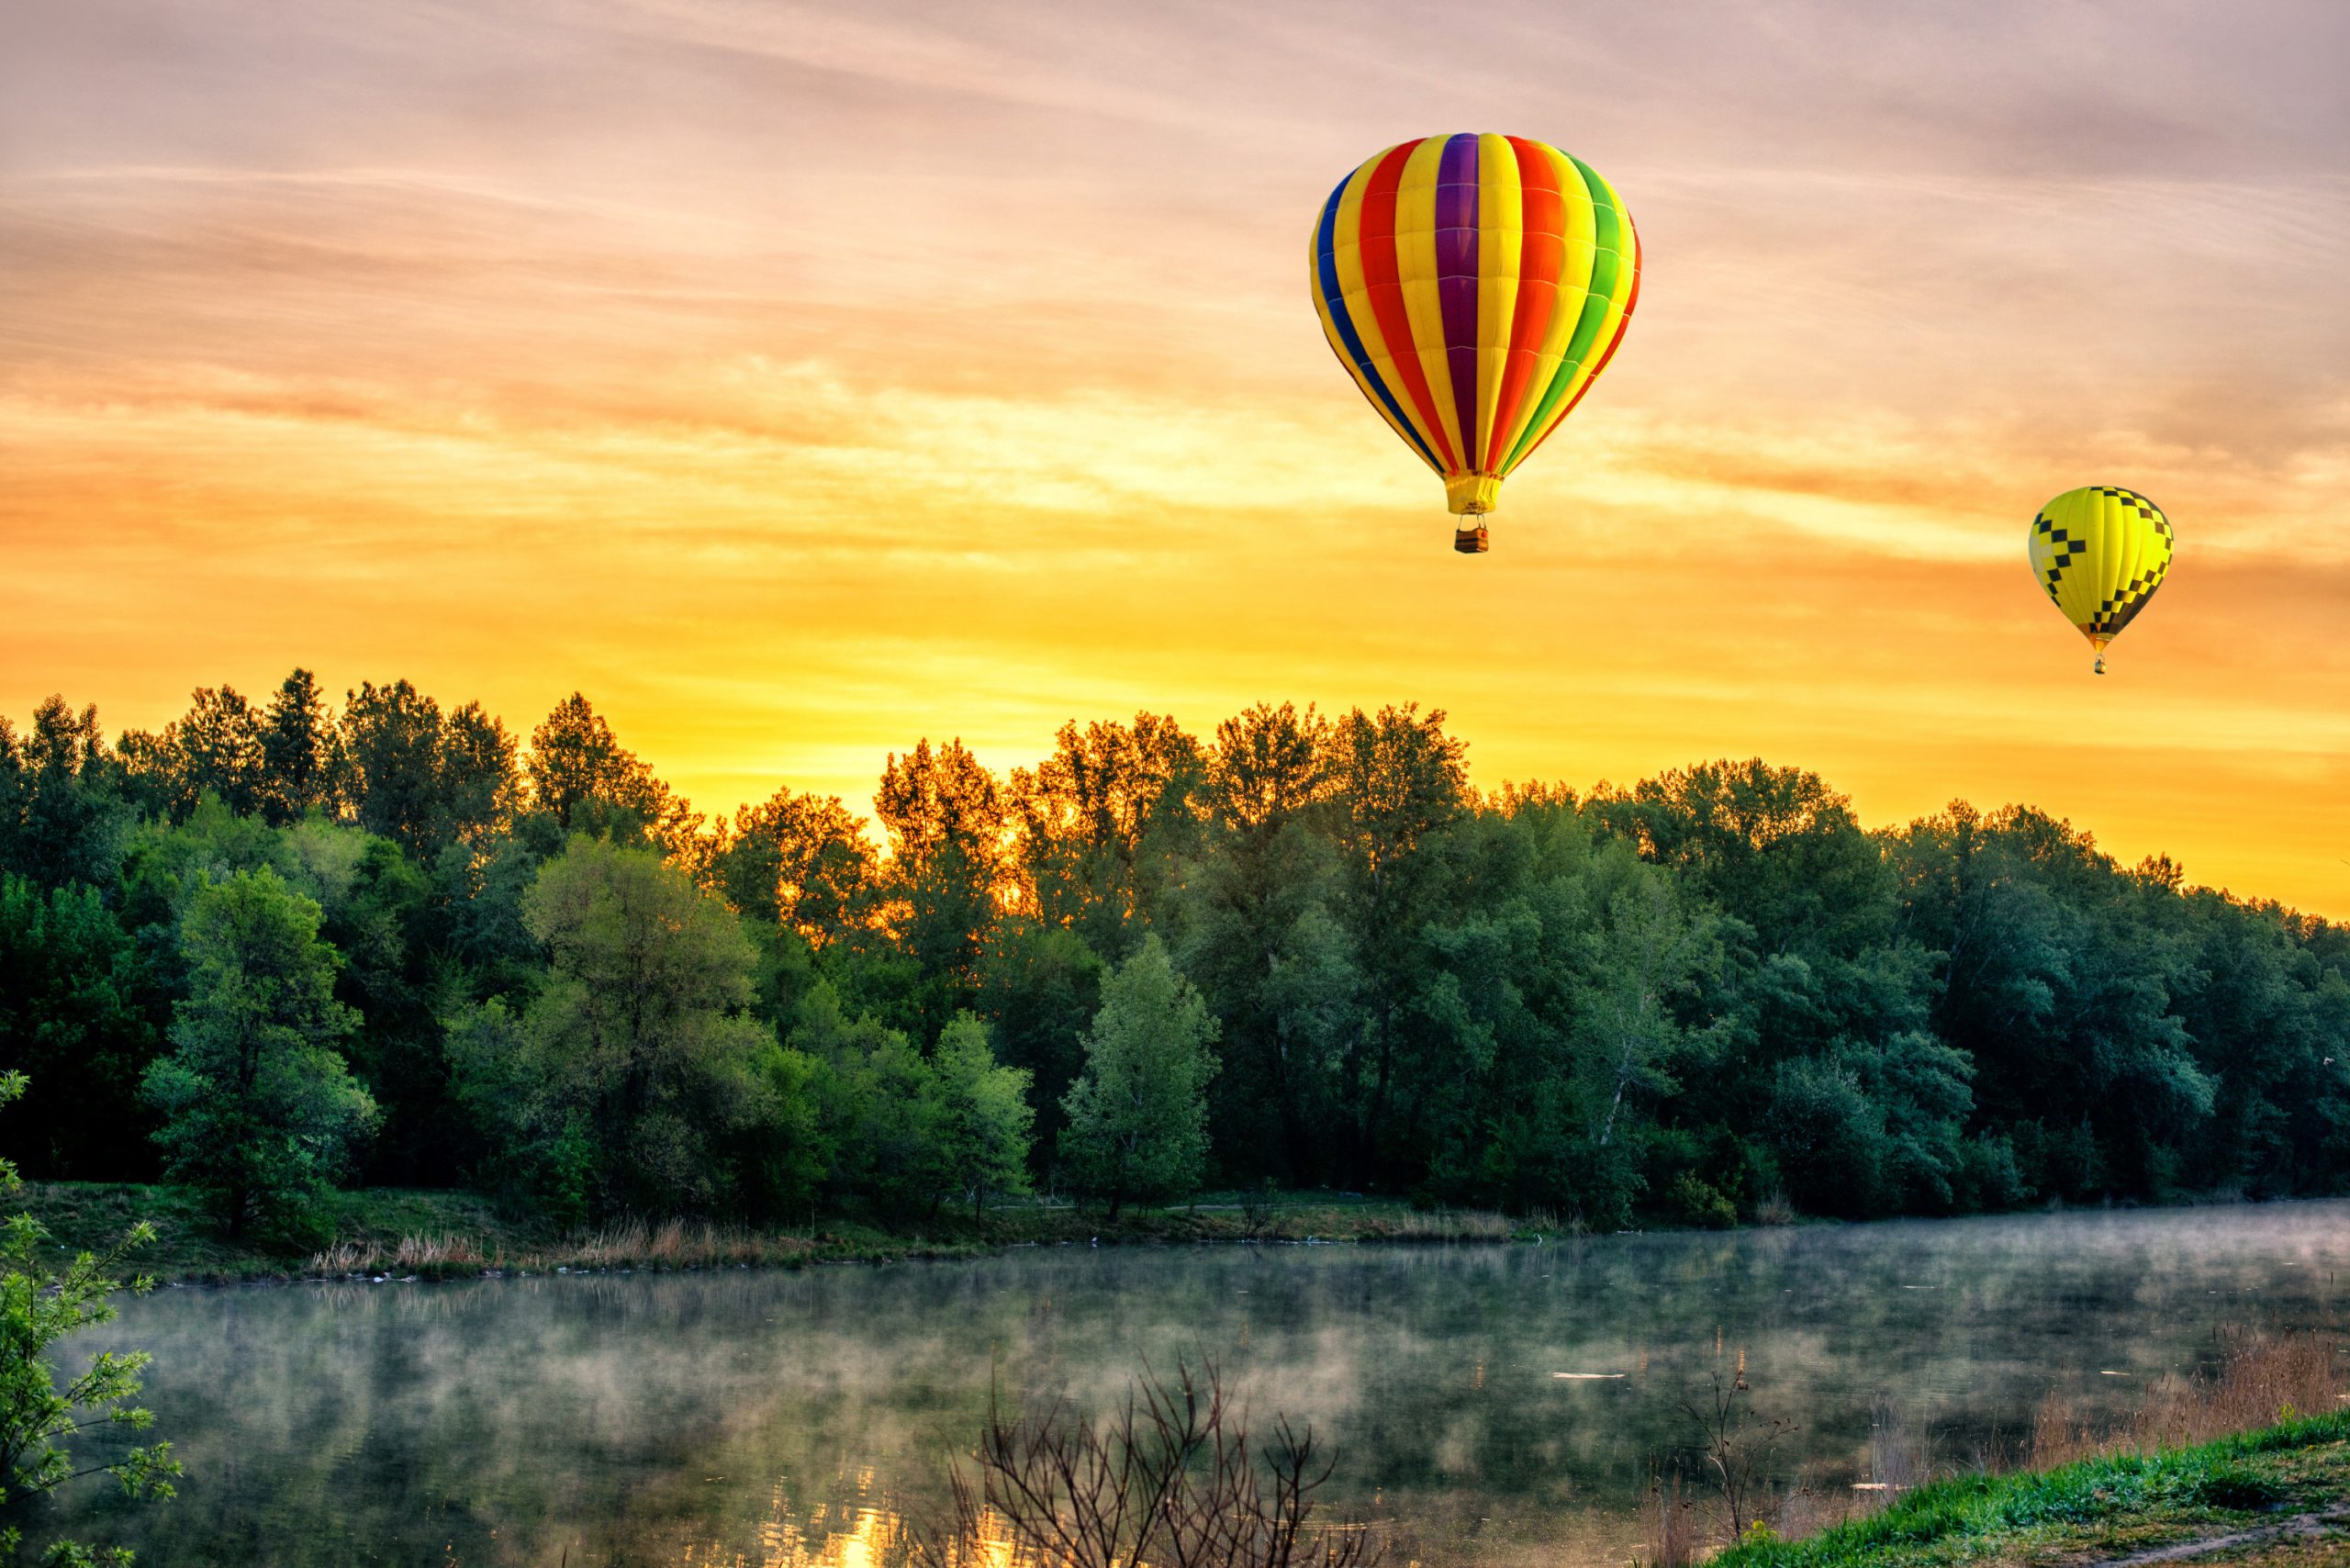 A beautiful sunrise over the river with a hot air balloons in the sky in the early morning.